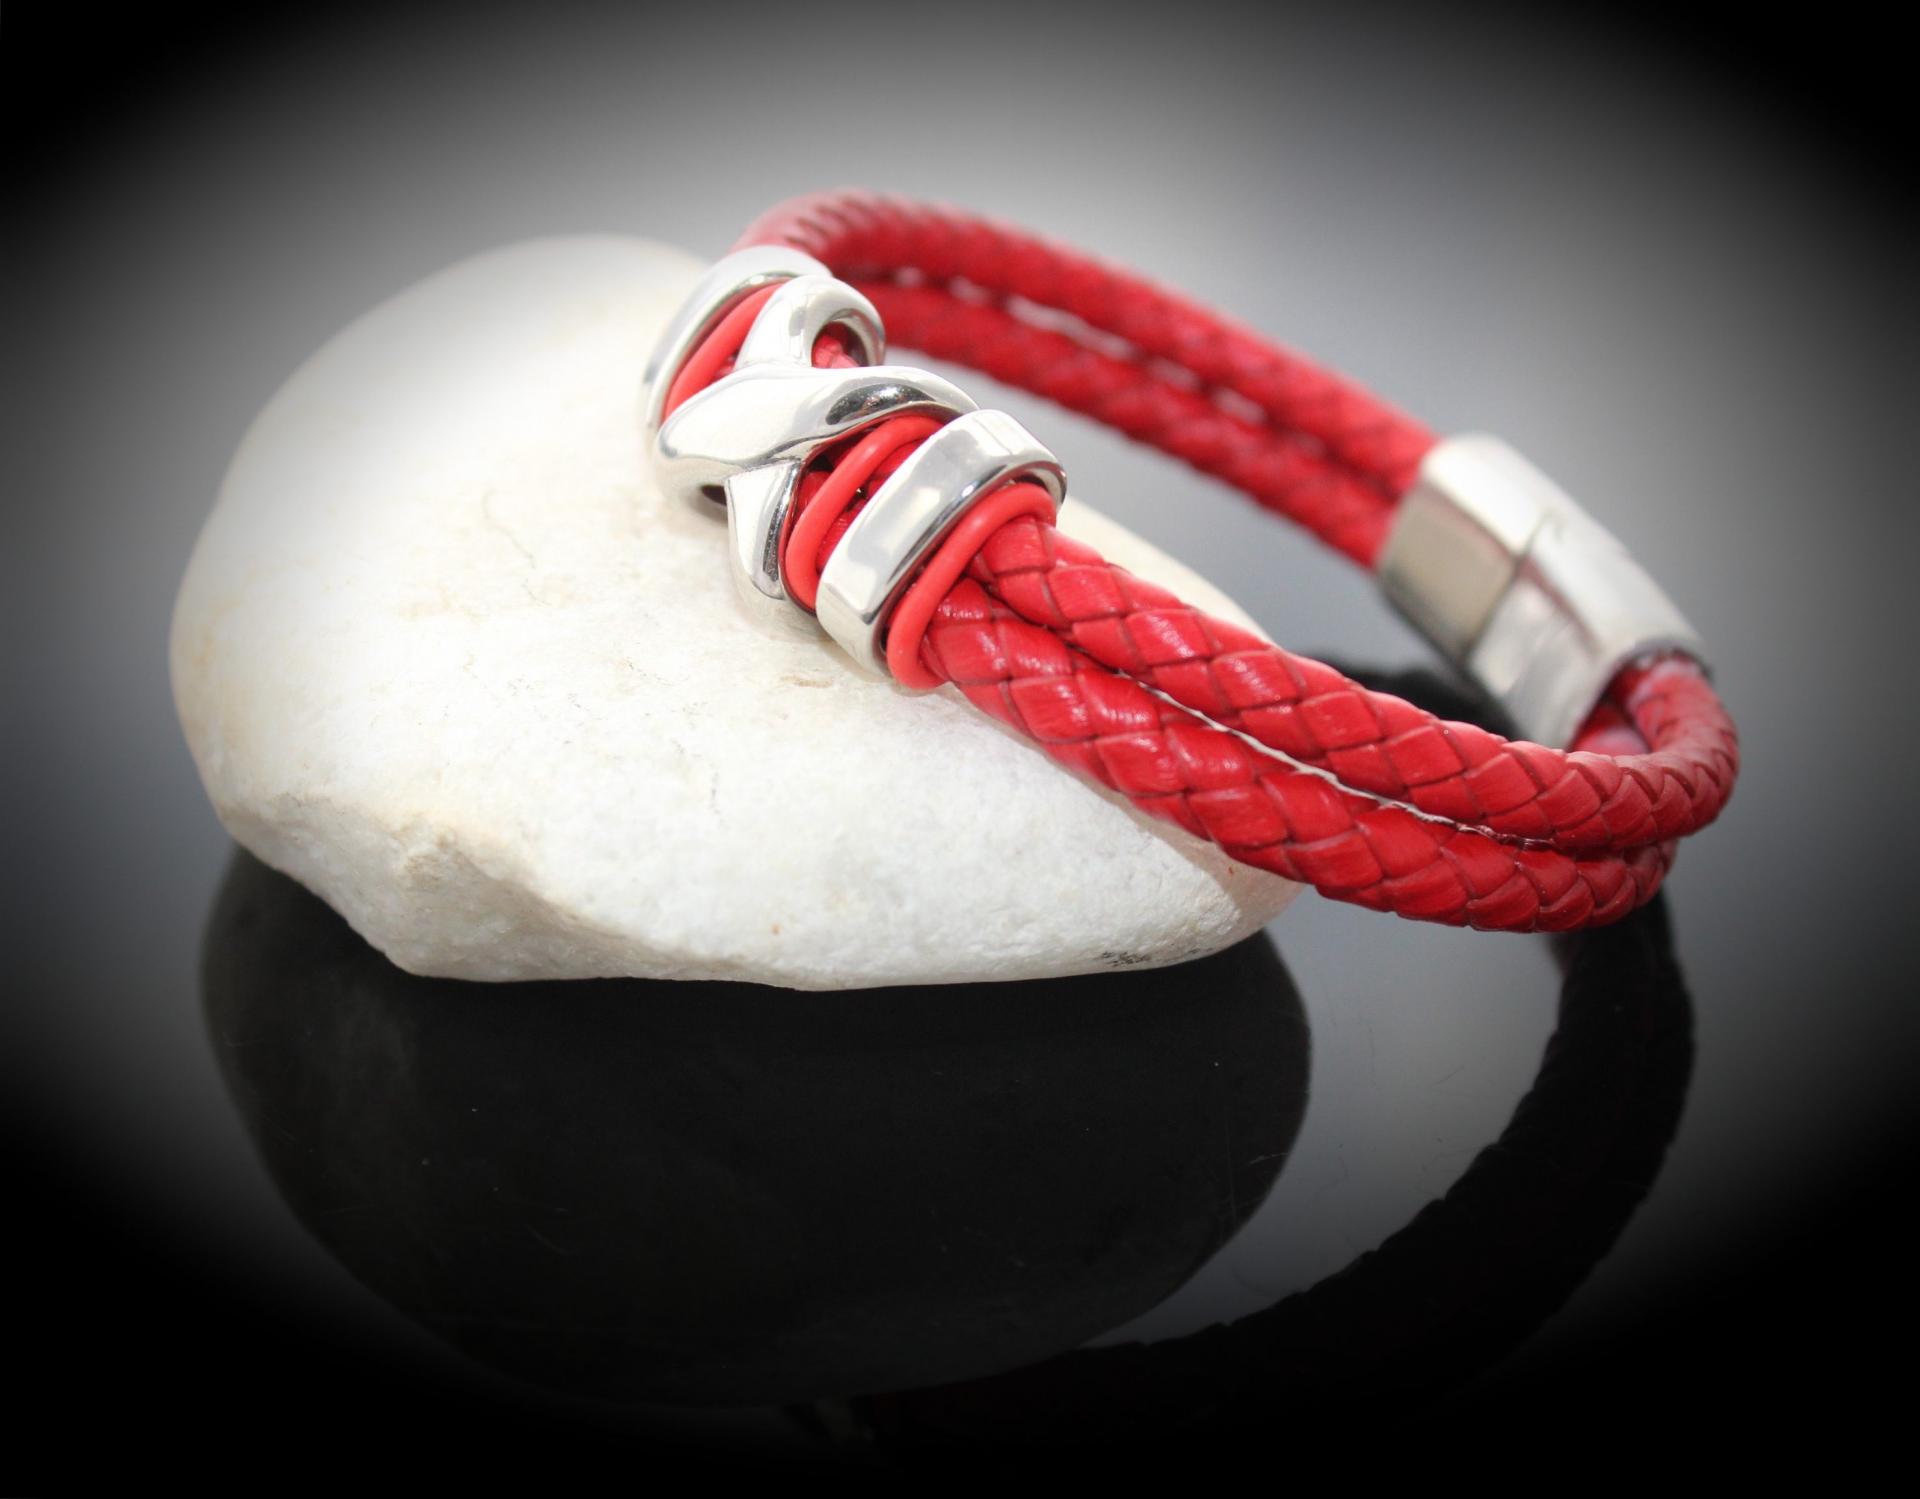 Red Double Layer Leather & Steel Bracelet - Customisable